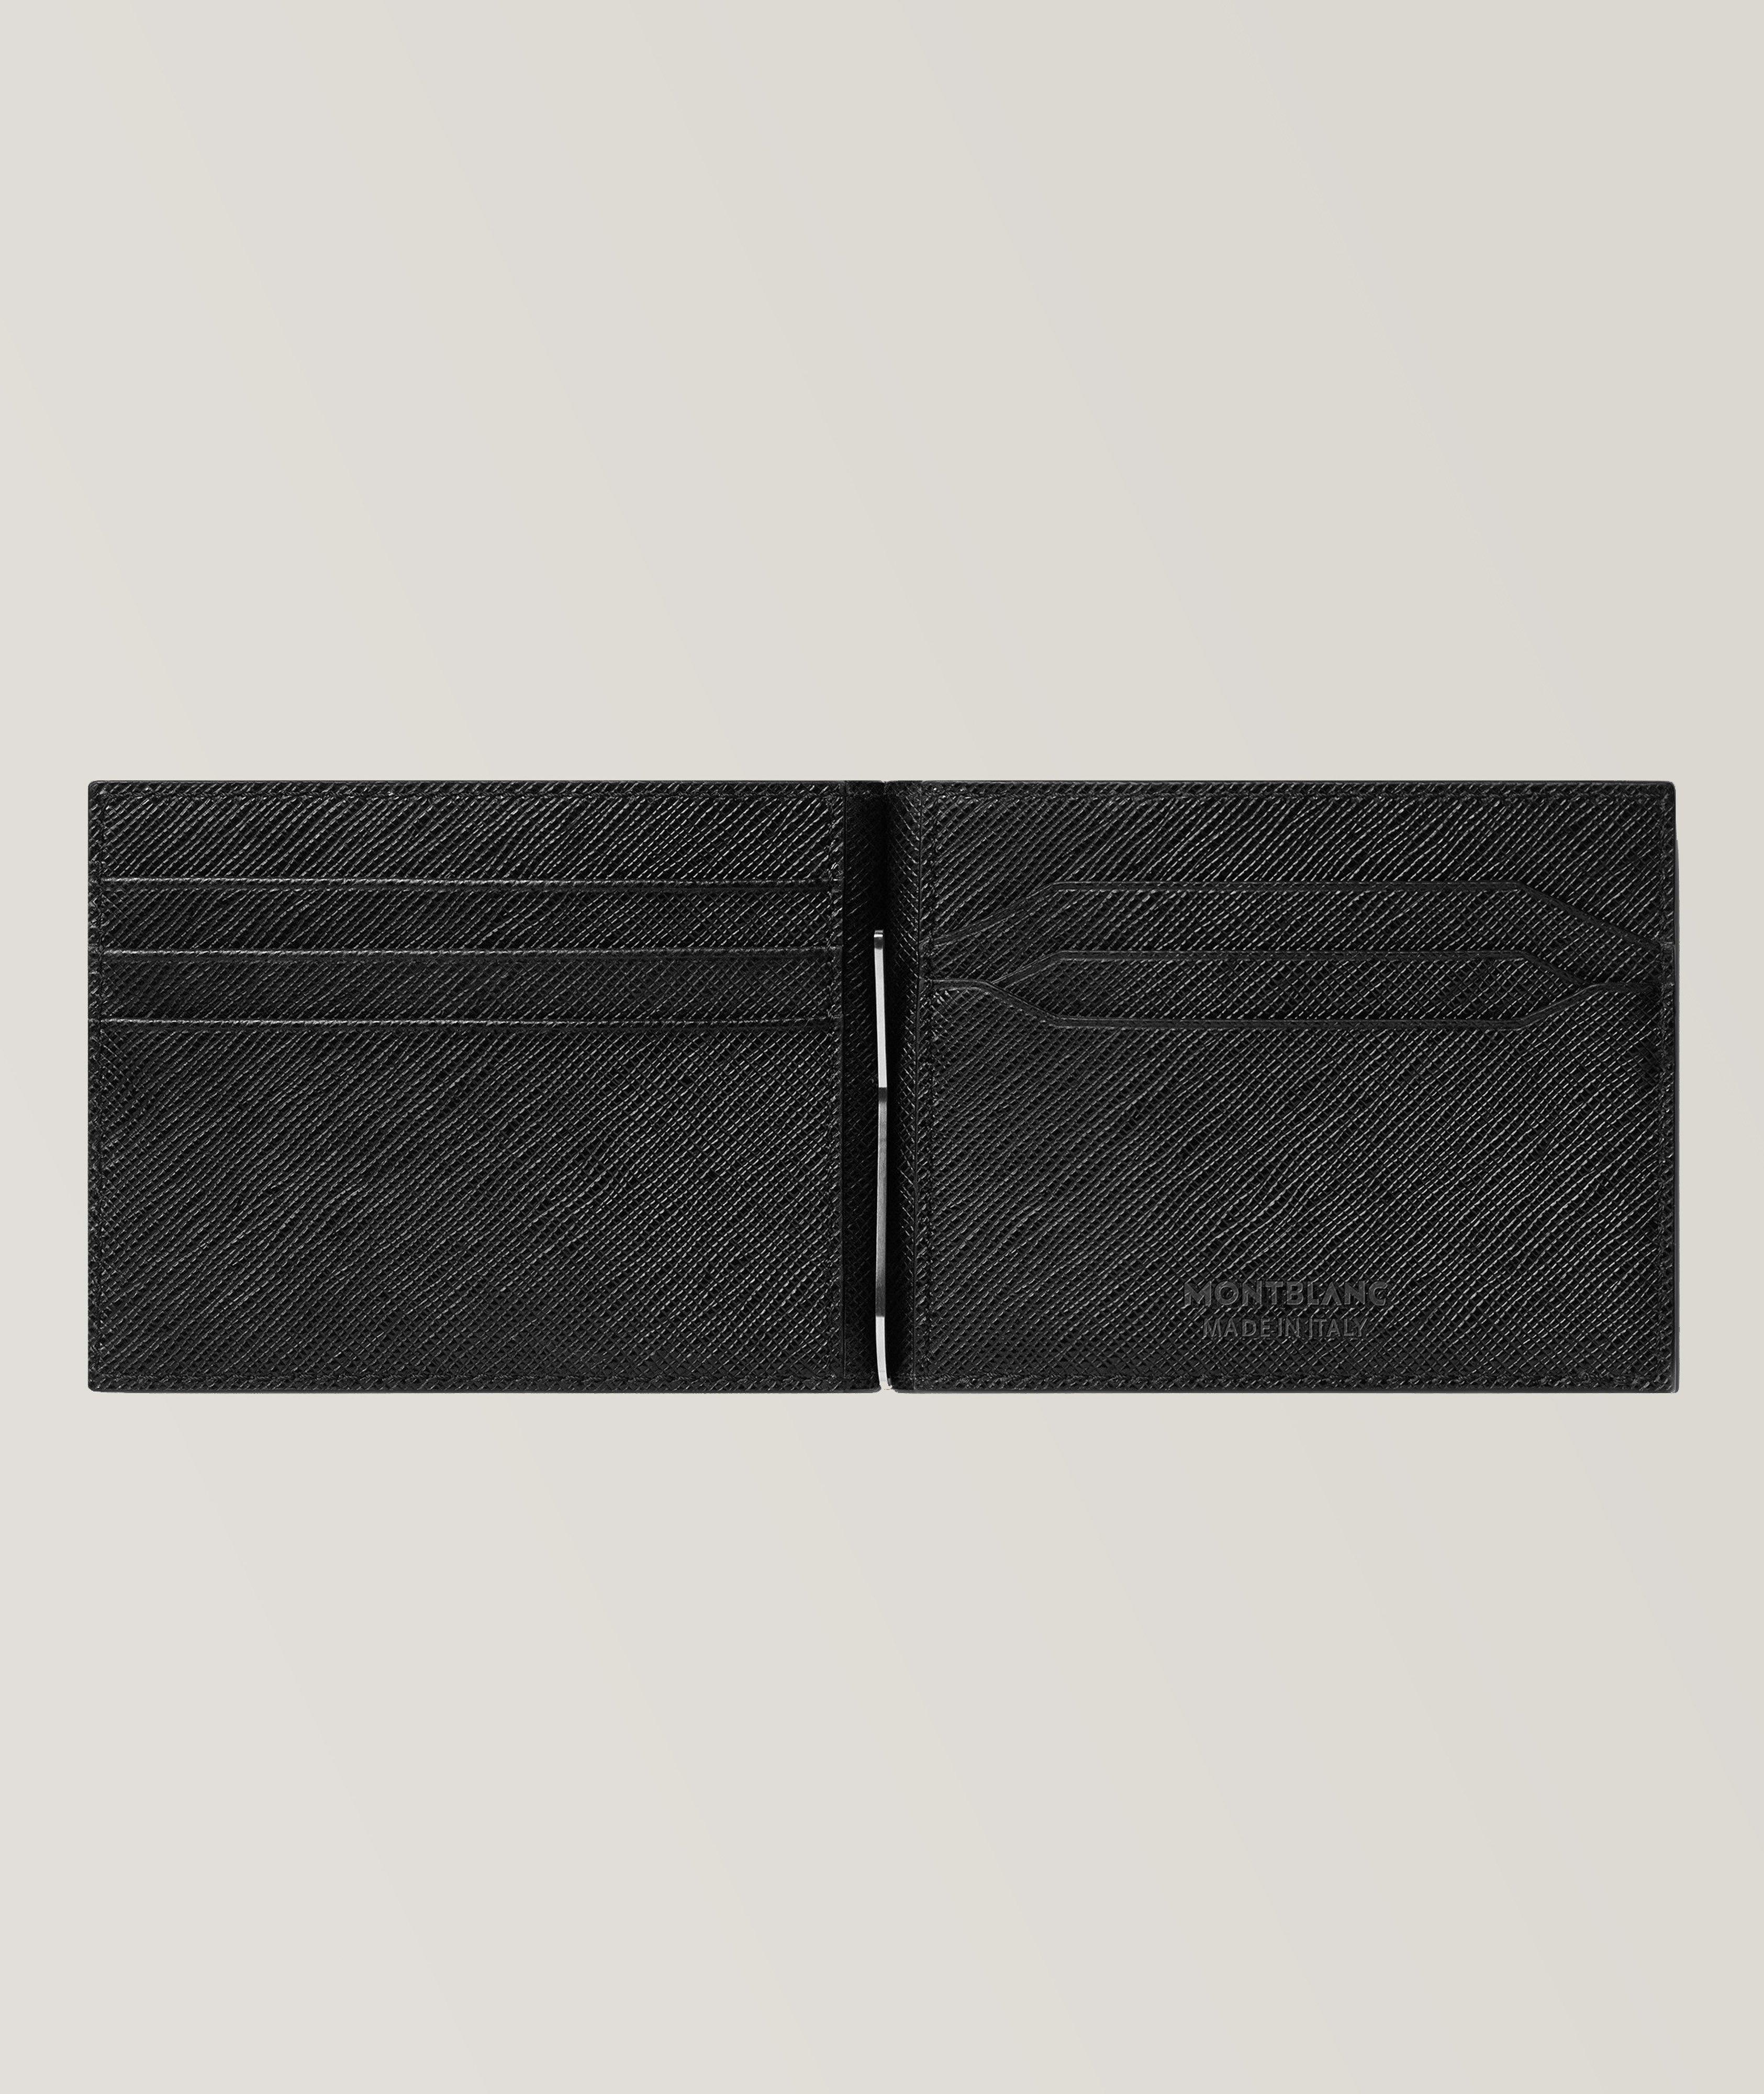 Sartorial Saffiano Leather Bifold Wallet image 2